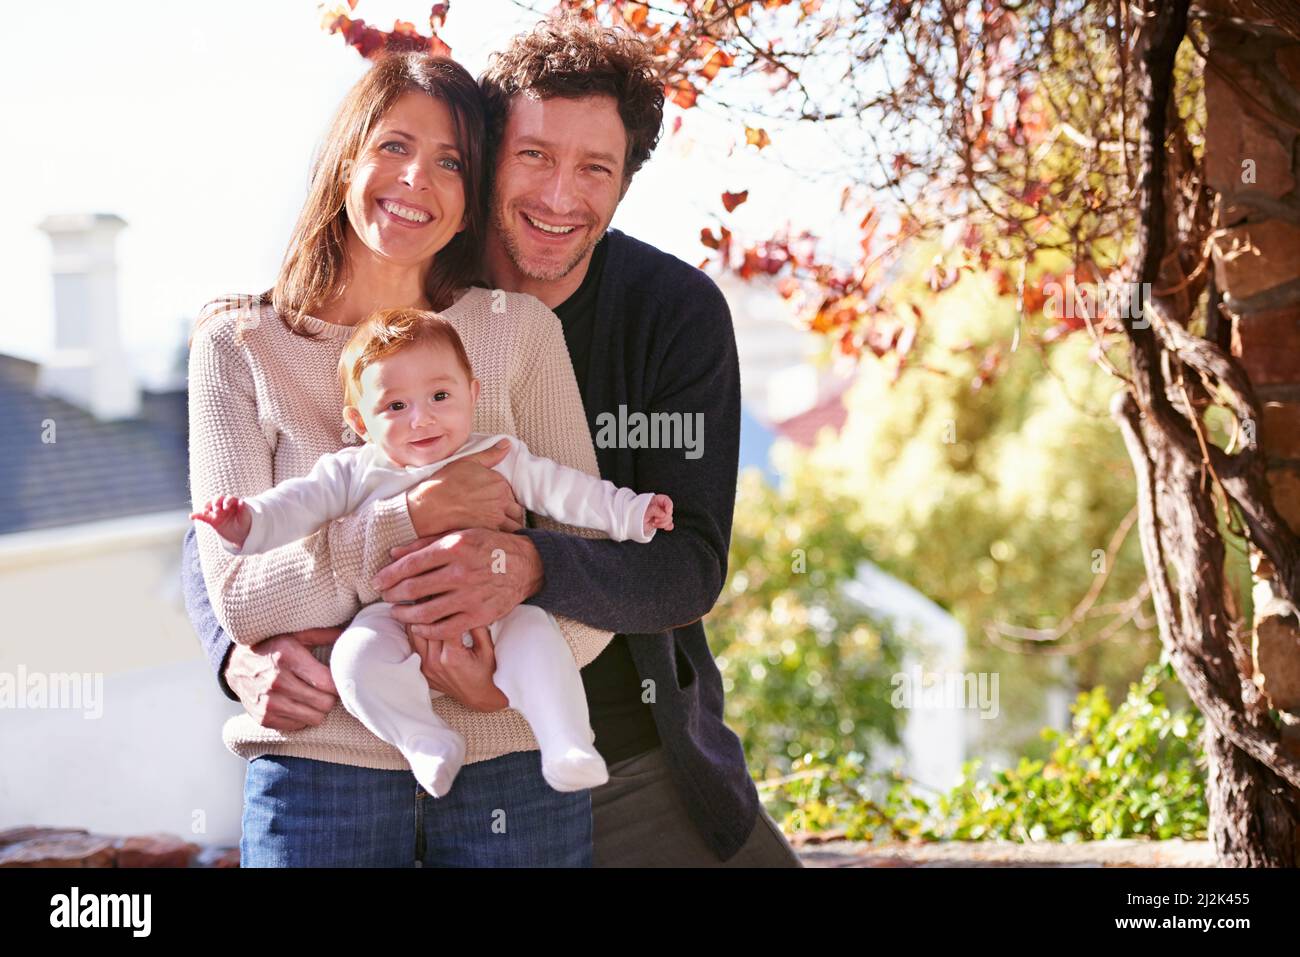 Their little bundle of joy. A portrait of a happy couple holding their baby outdoors. Stock Photo